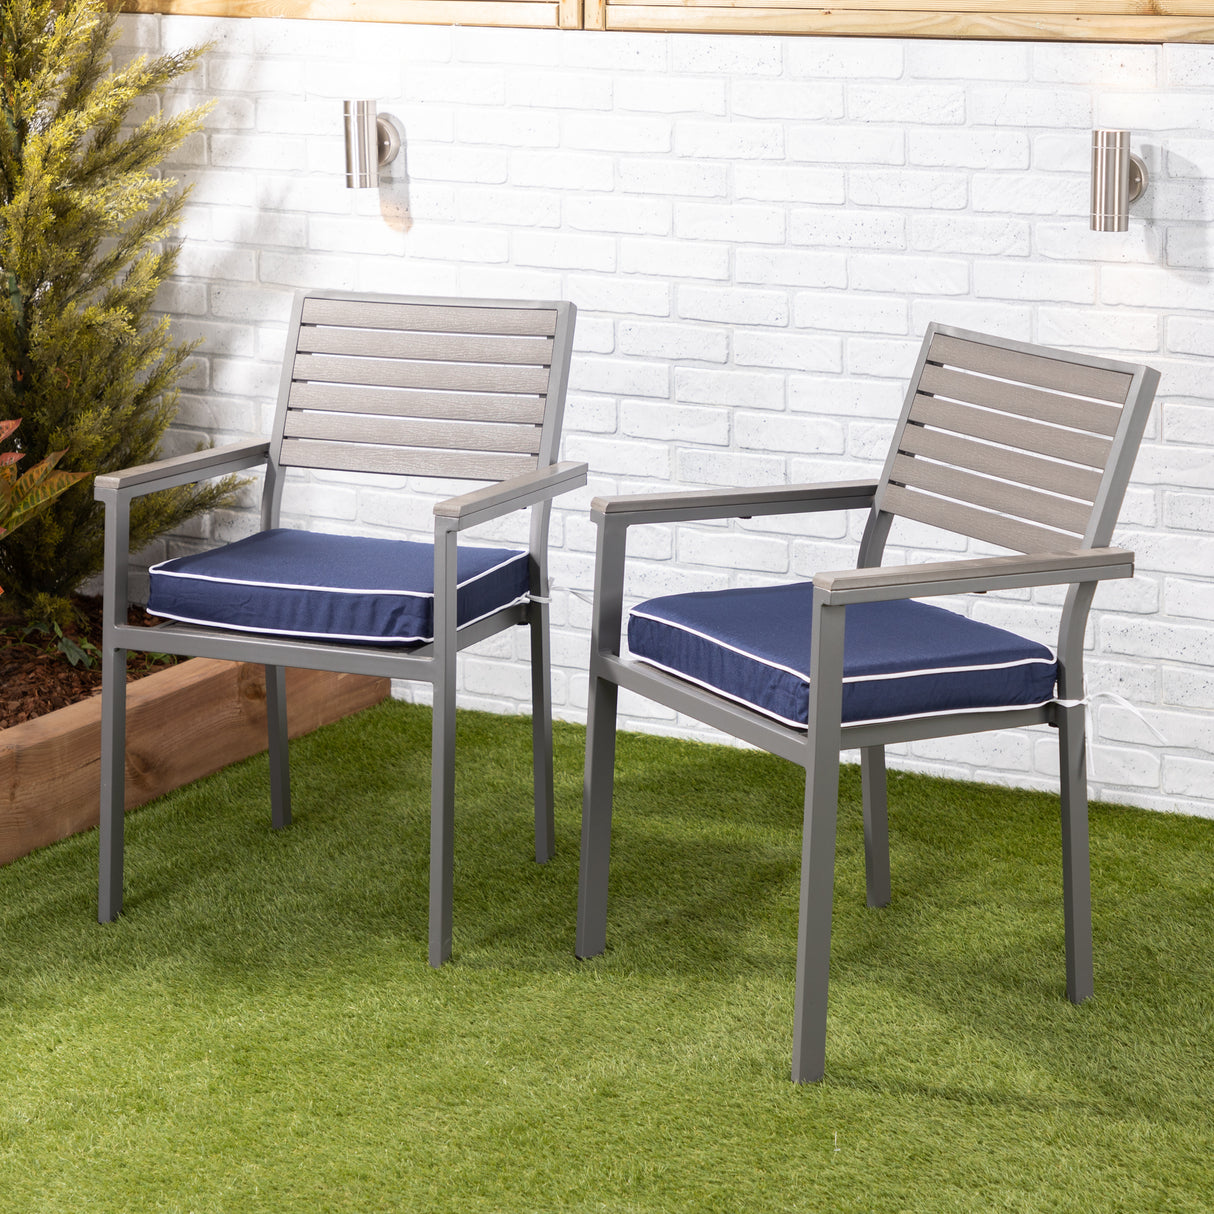 Alfresia Garden Seat Pads Set of 2, Small - Luxury Style